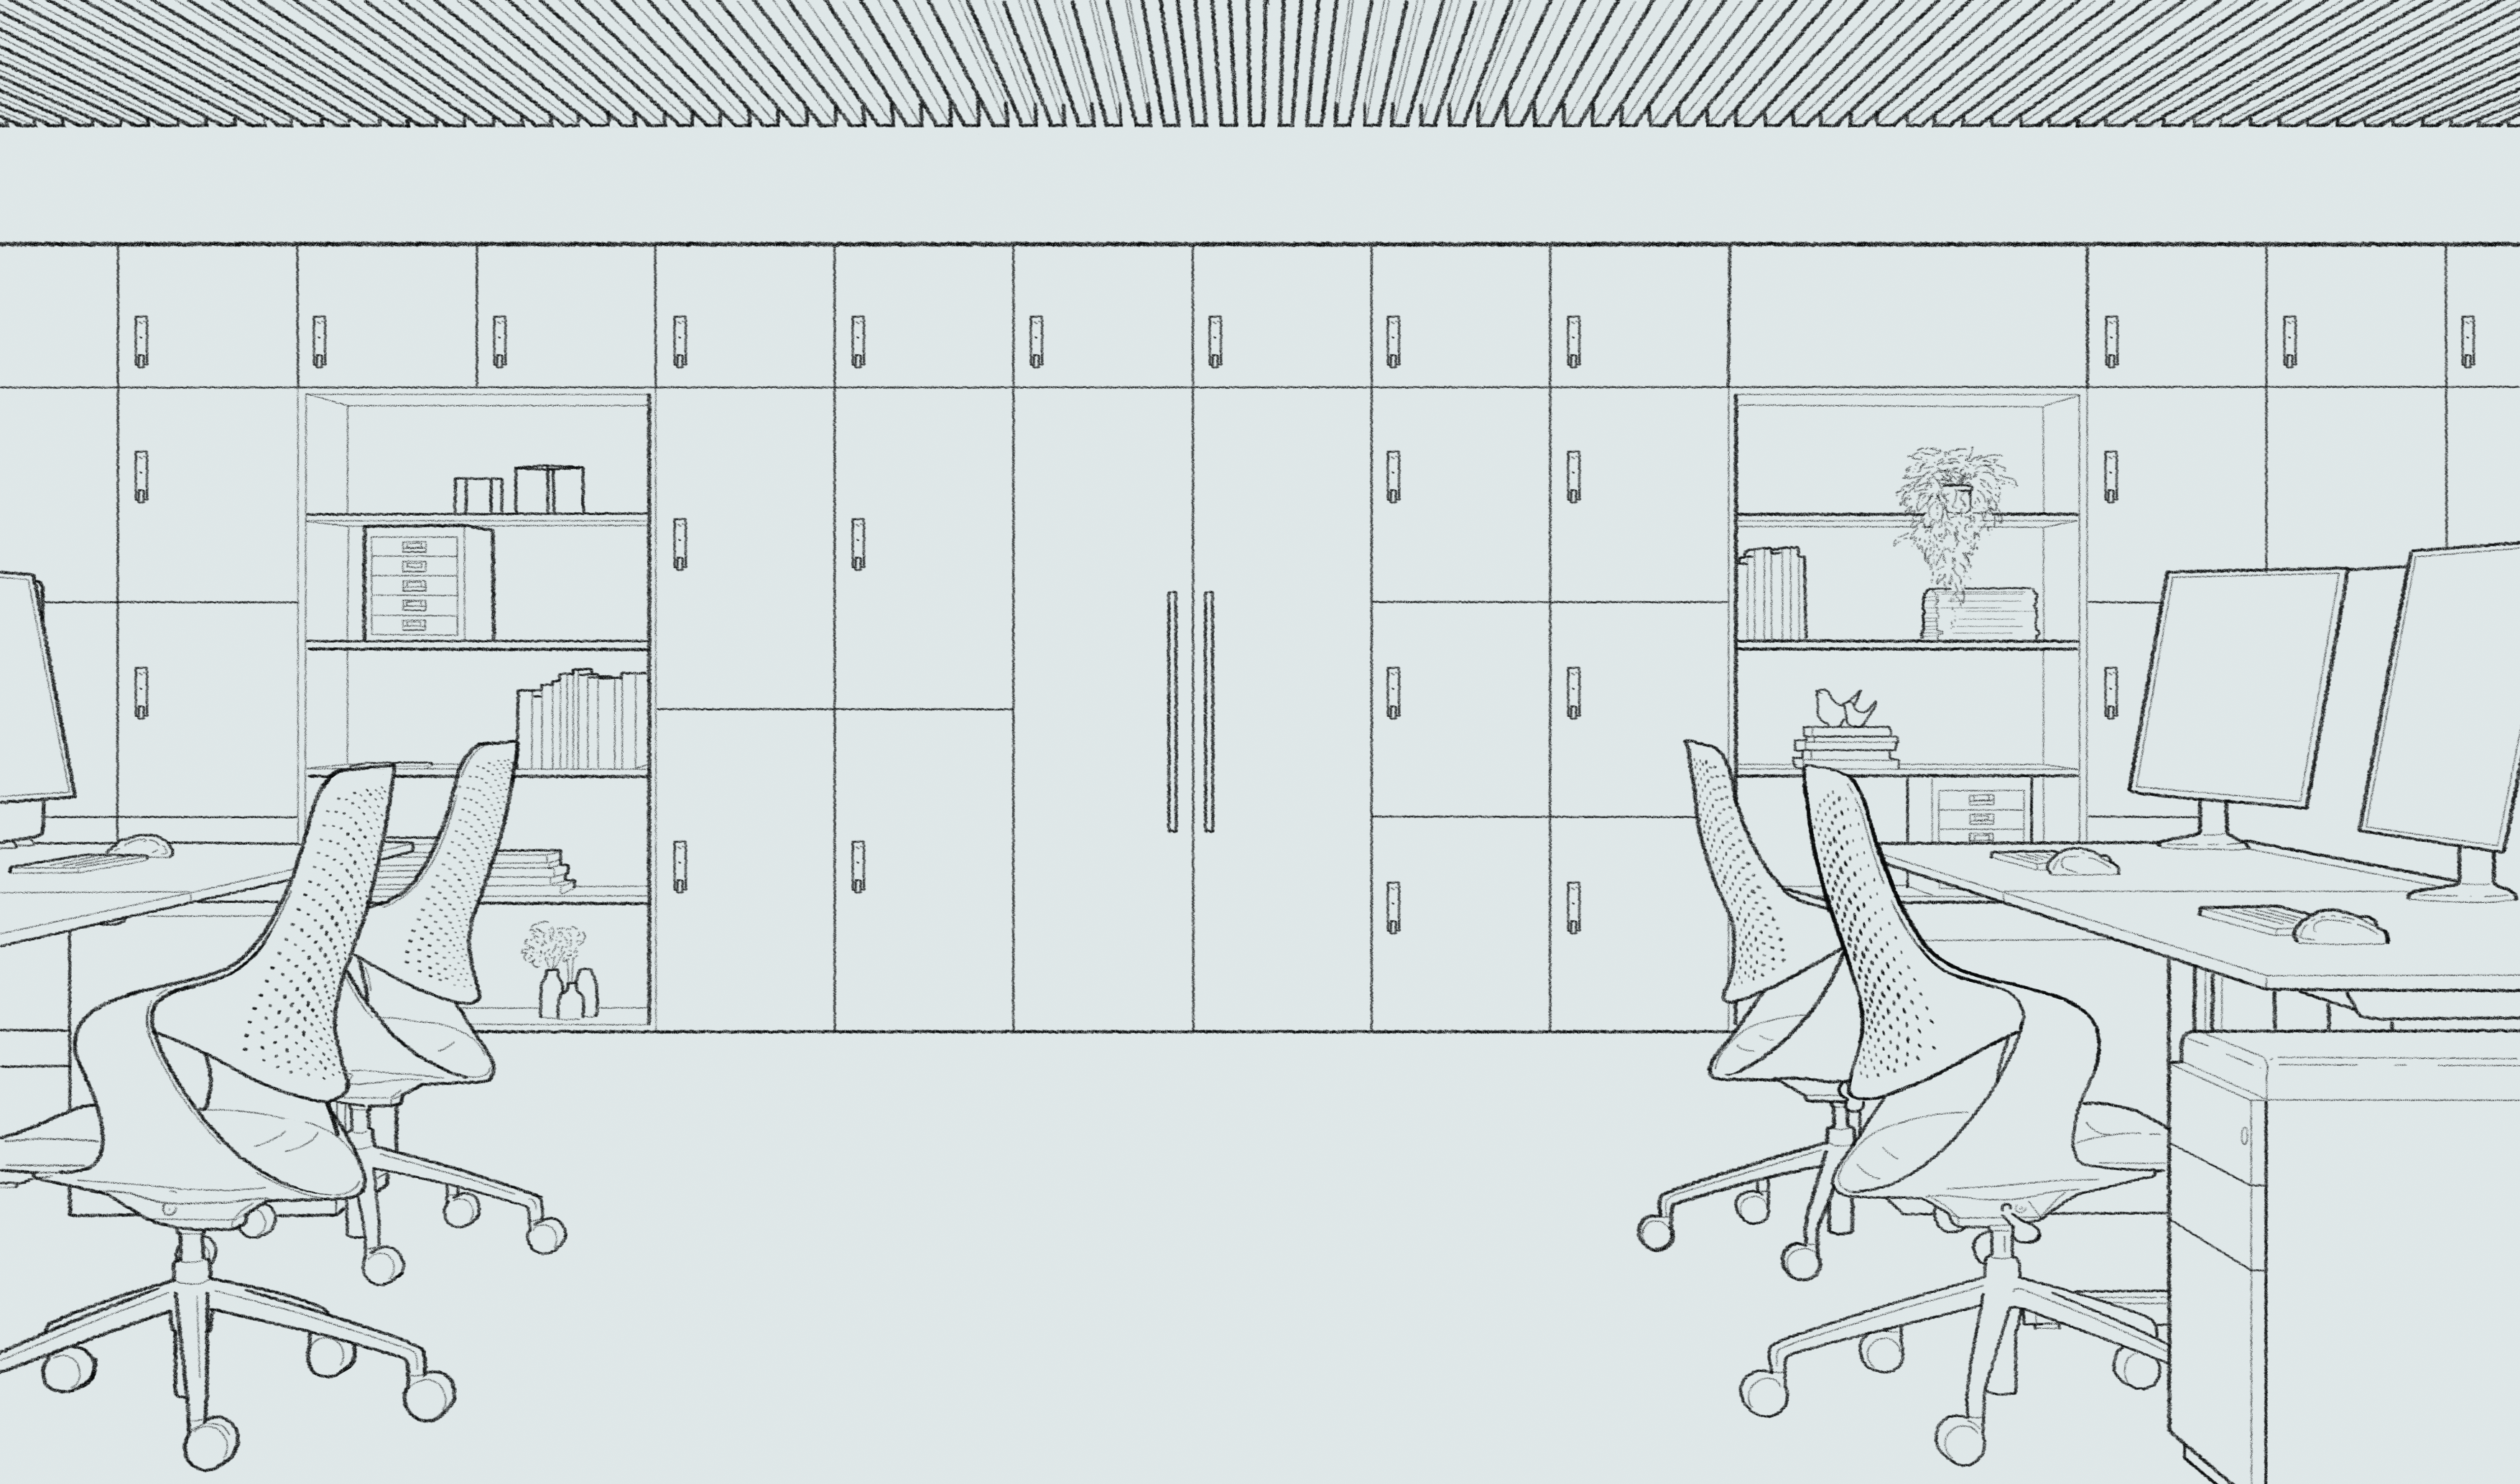 A pencil sketch of a Personal Storage in an office